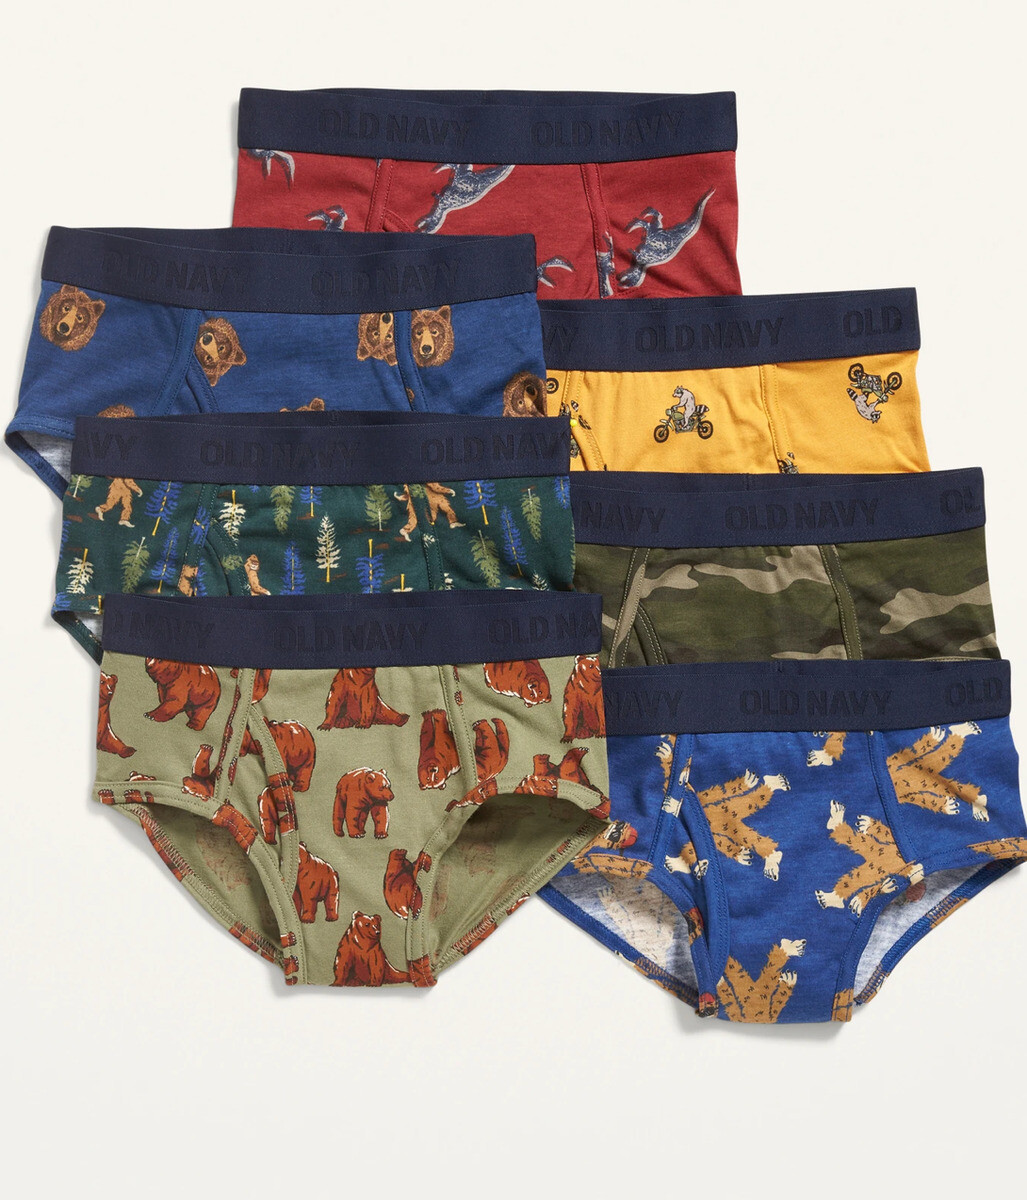 Old Navy Boys 7-Pack Boxers Set